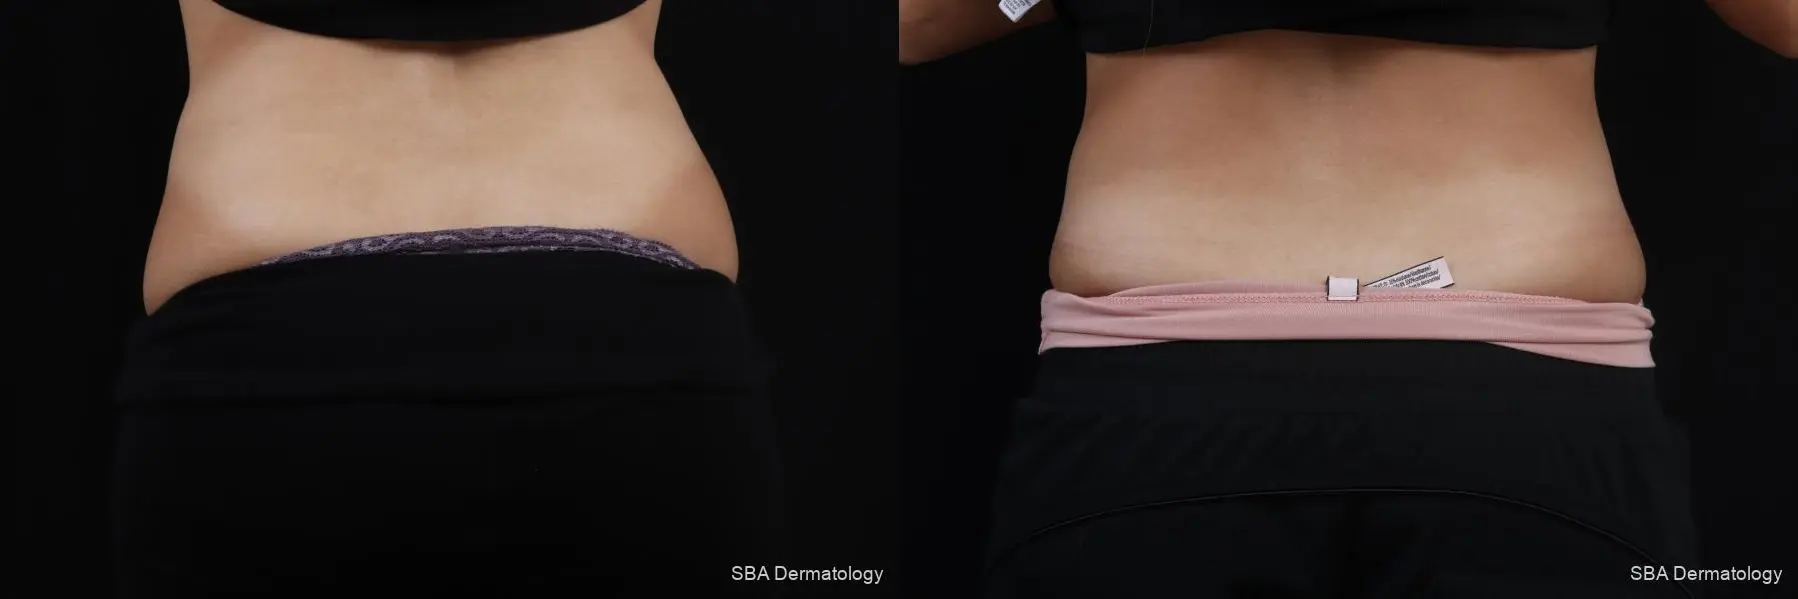 Coolsculpting: Patient 8 - Before and After 5